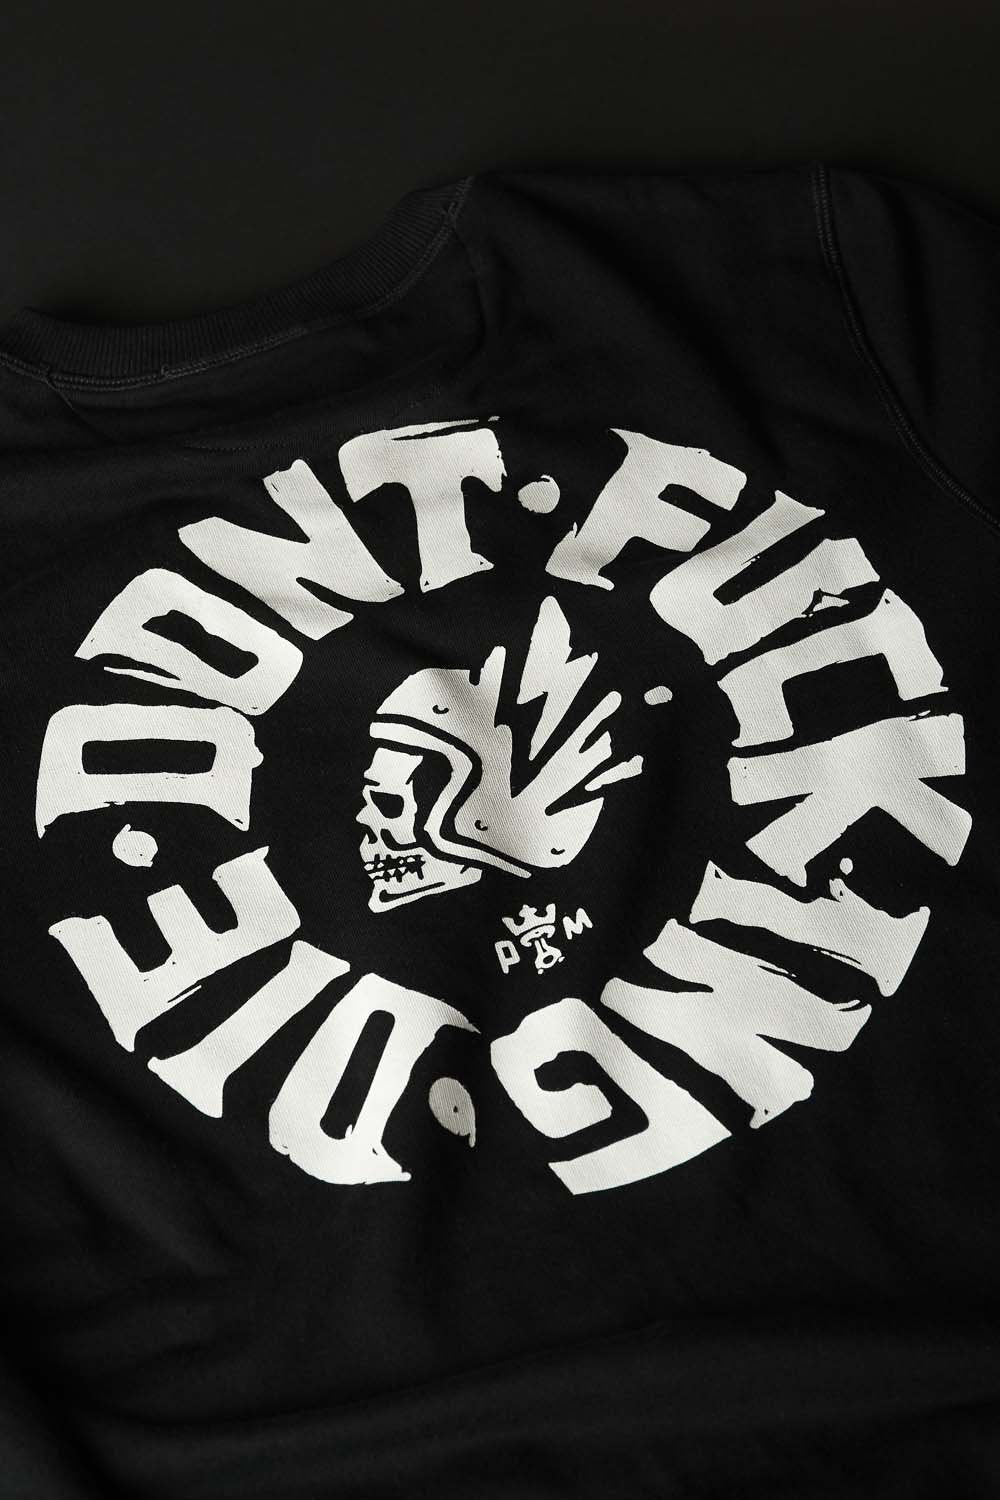 A close up of the Don't fucking die motive on the black Pando Moto motorcycle sweatshirt 